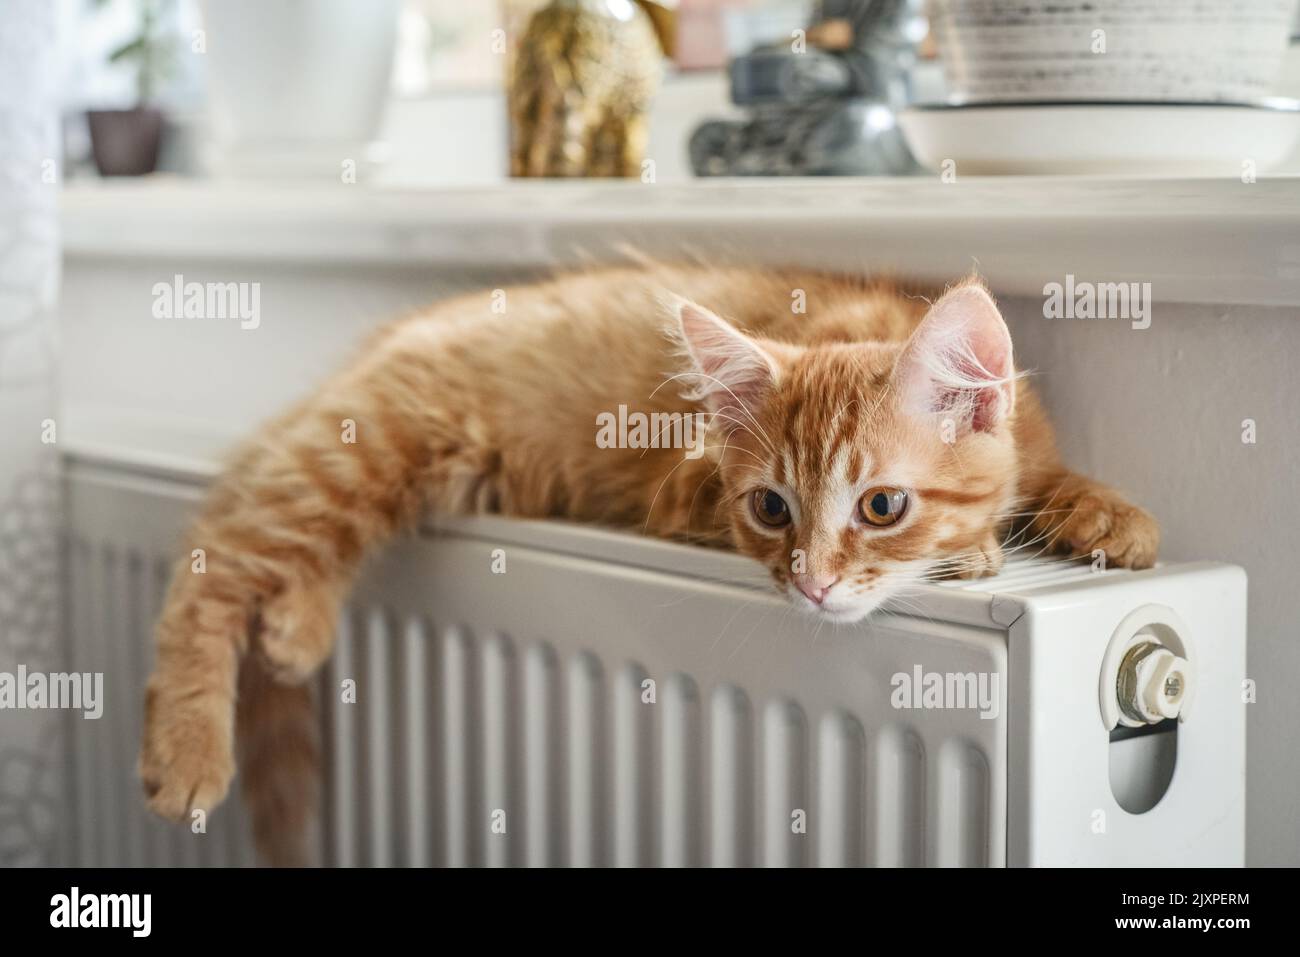 Cute little ginger kitten with amber eyes relaxing on the warm radiator closeup Stock Photo